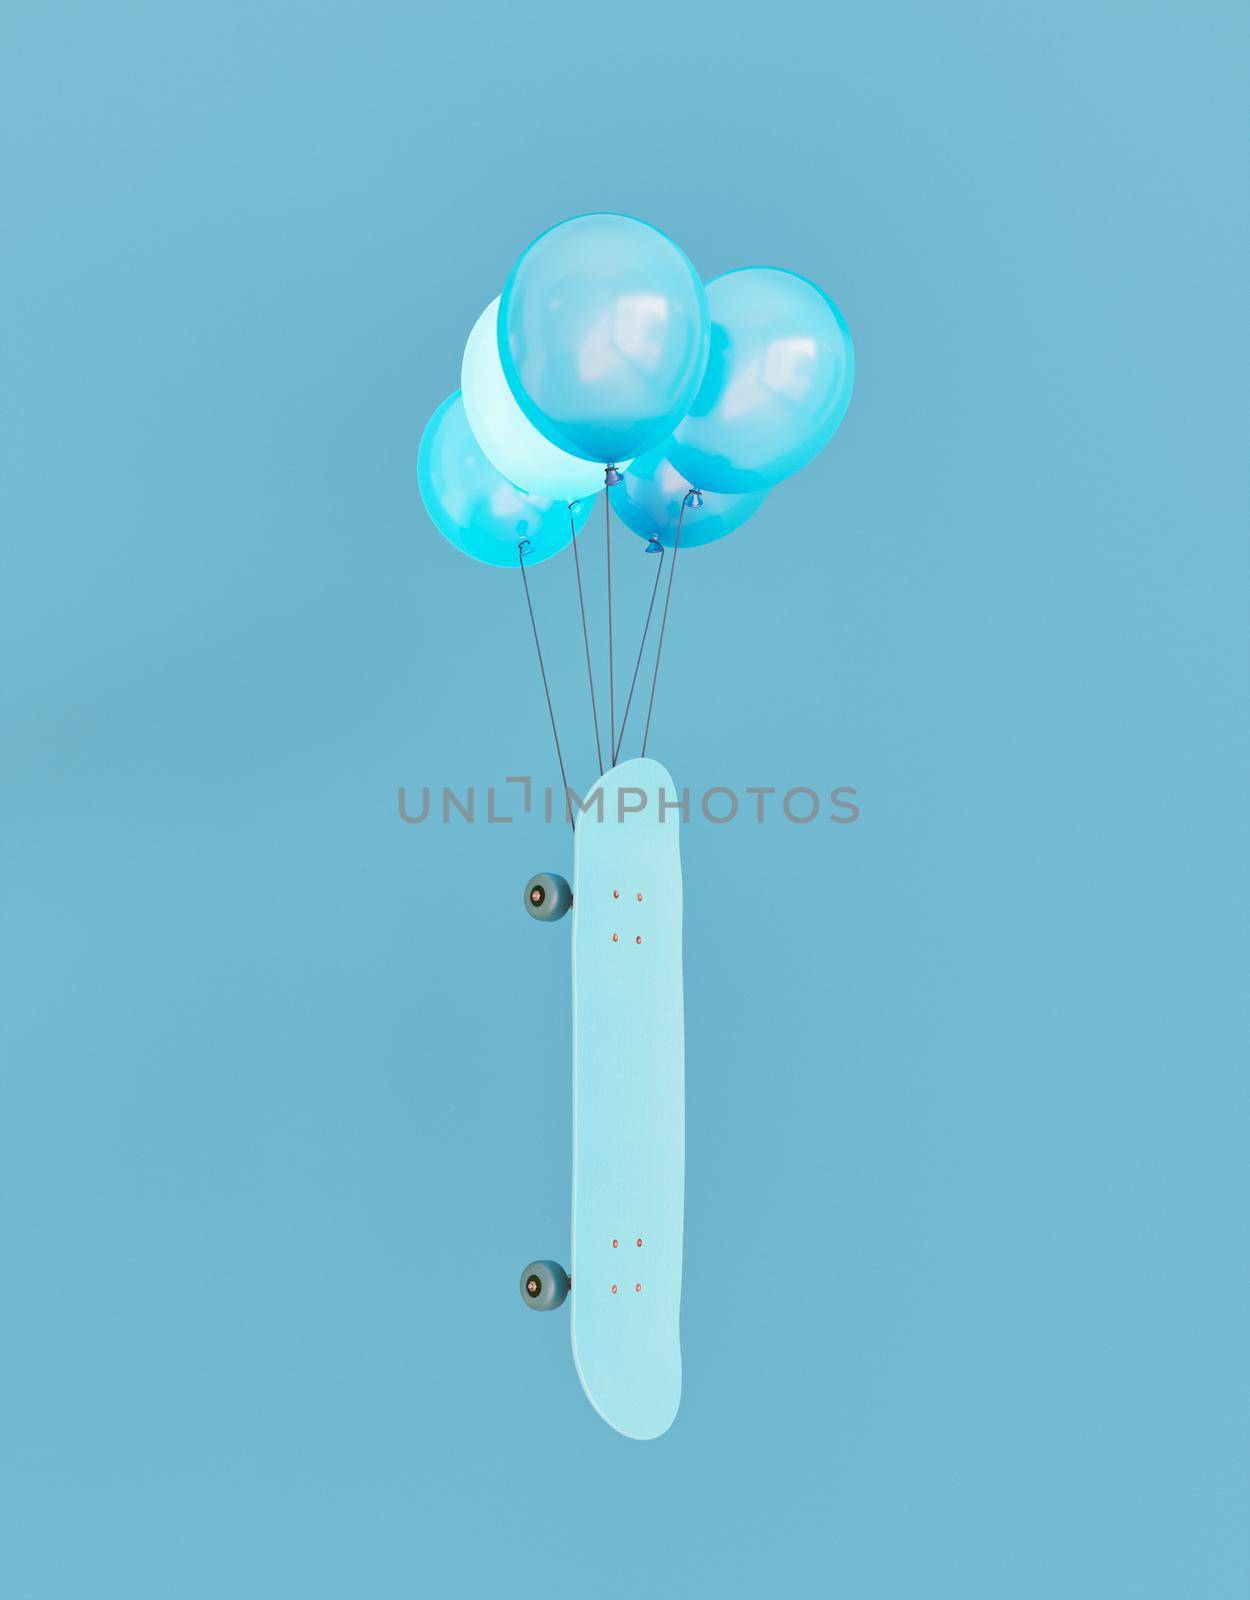 skateboard attached to balloons by asolano